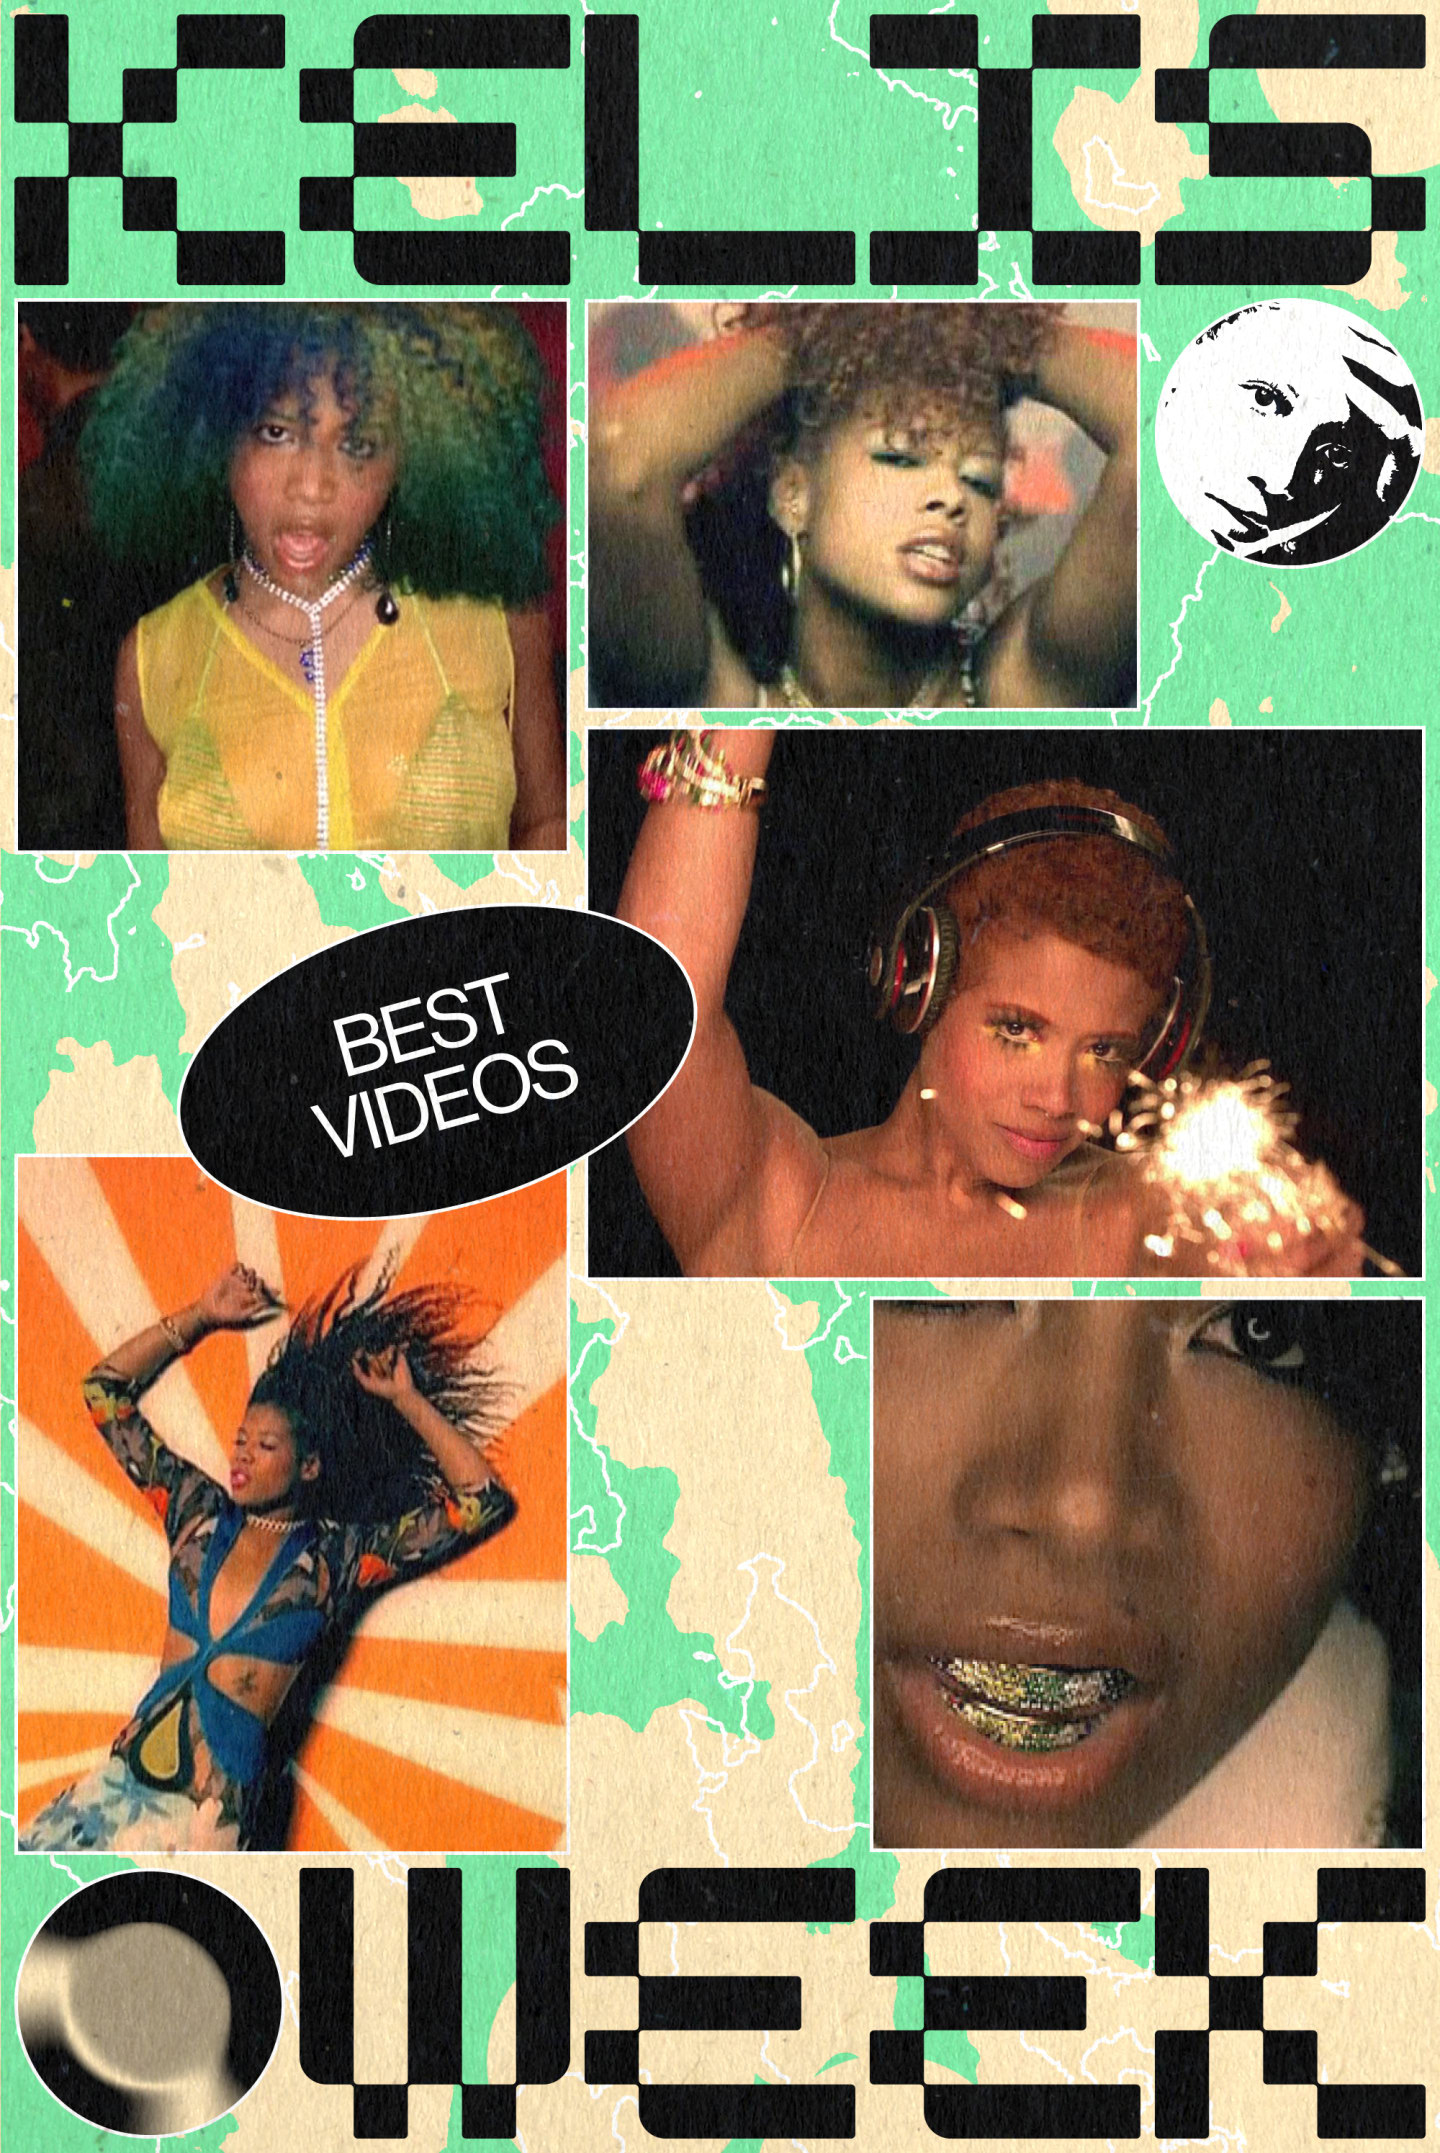 All of Kelis’s music videos are works of art